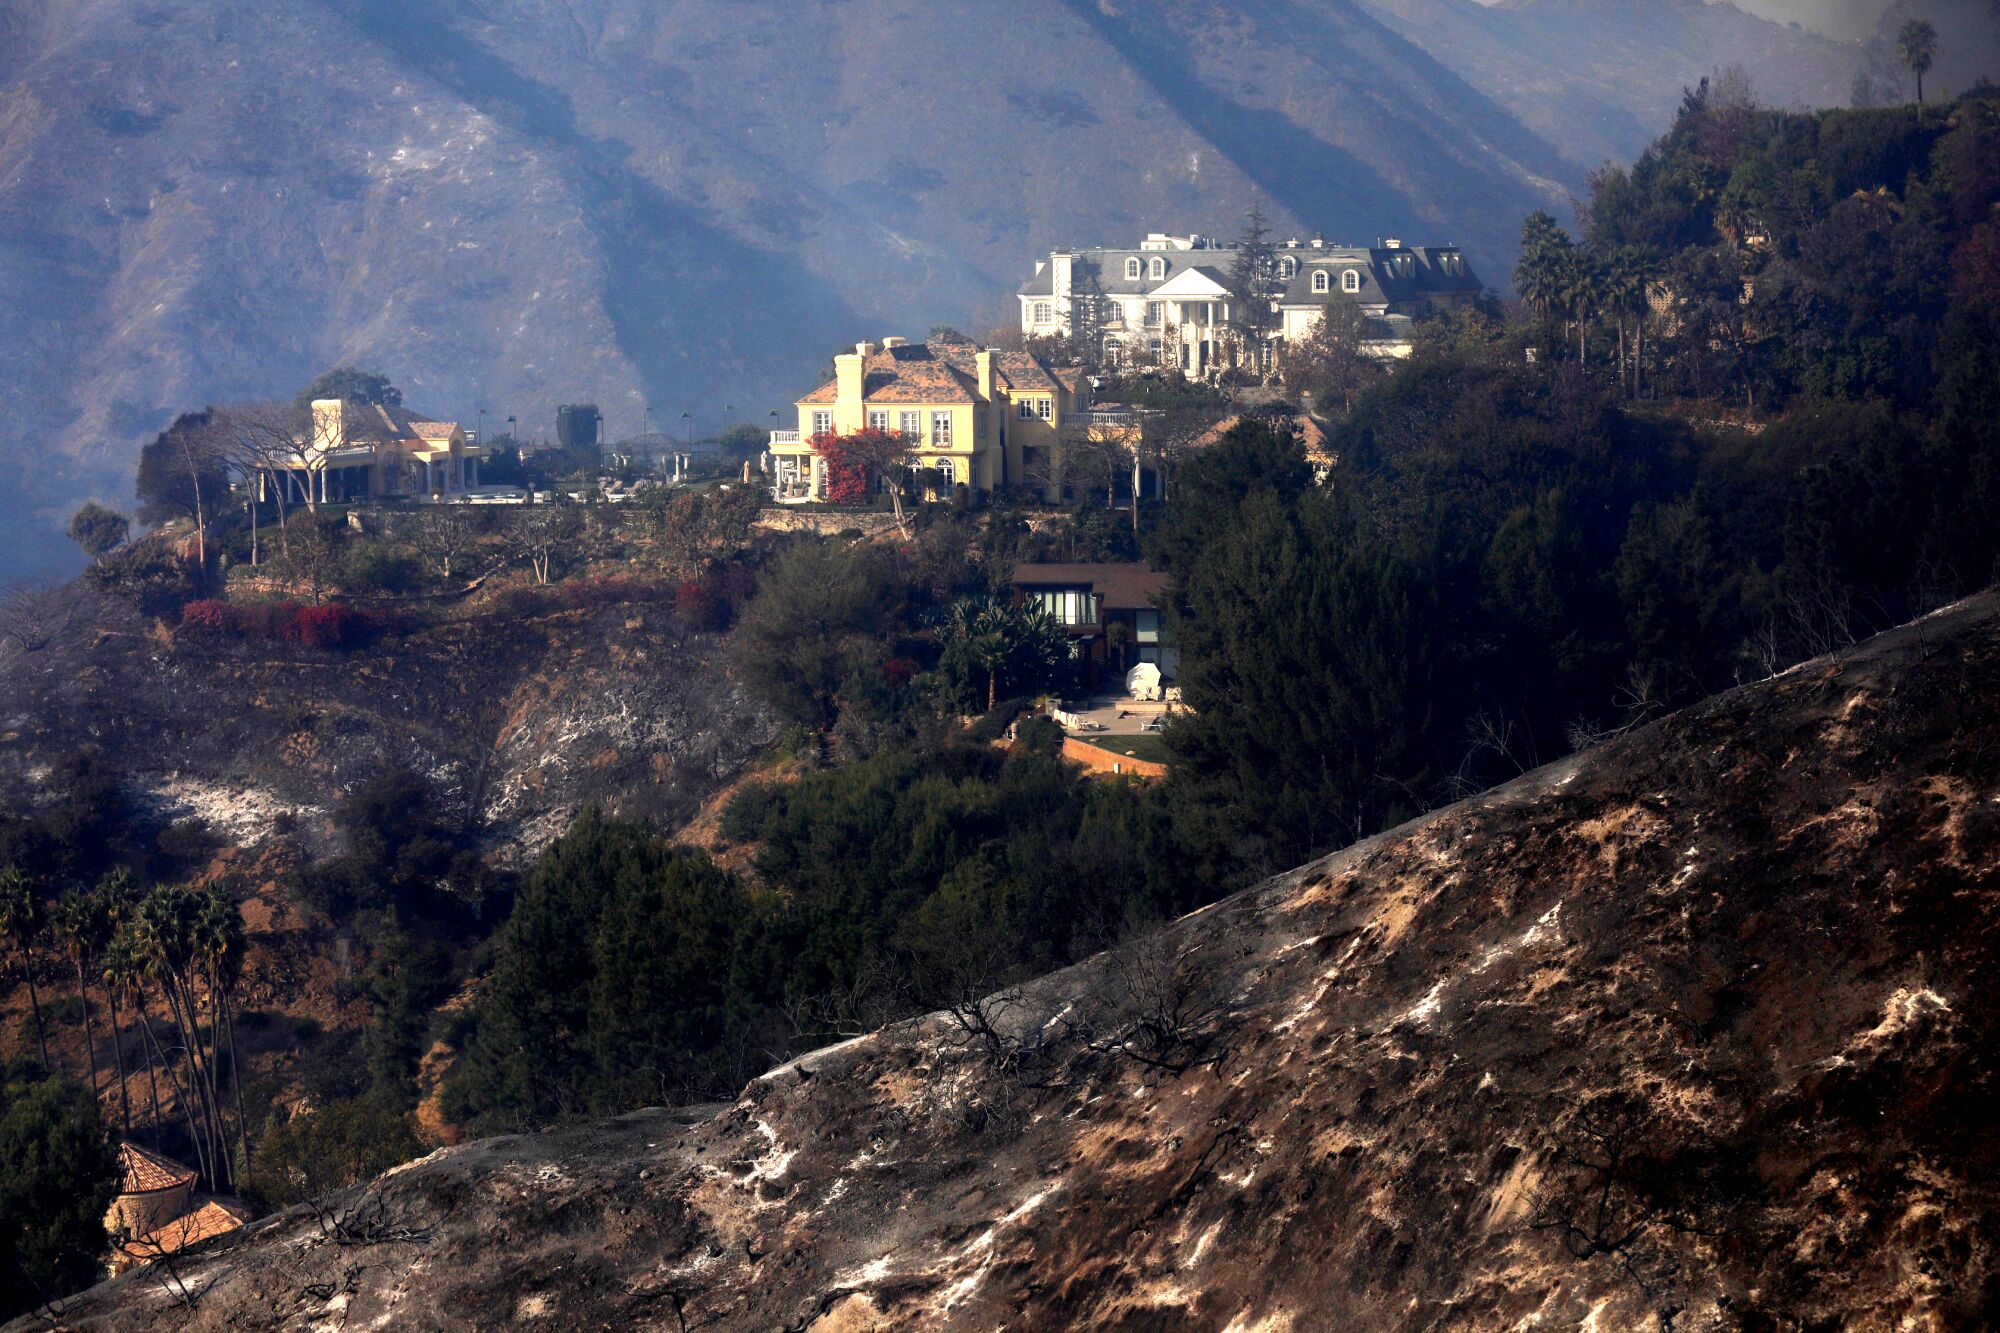 Scorched earth is seen in the foreground, with a group of mansions in the background